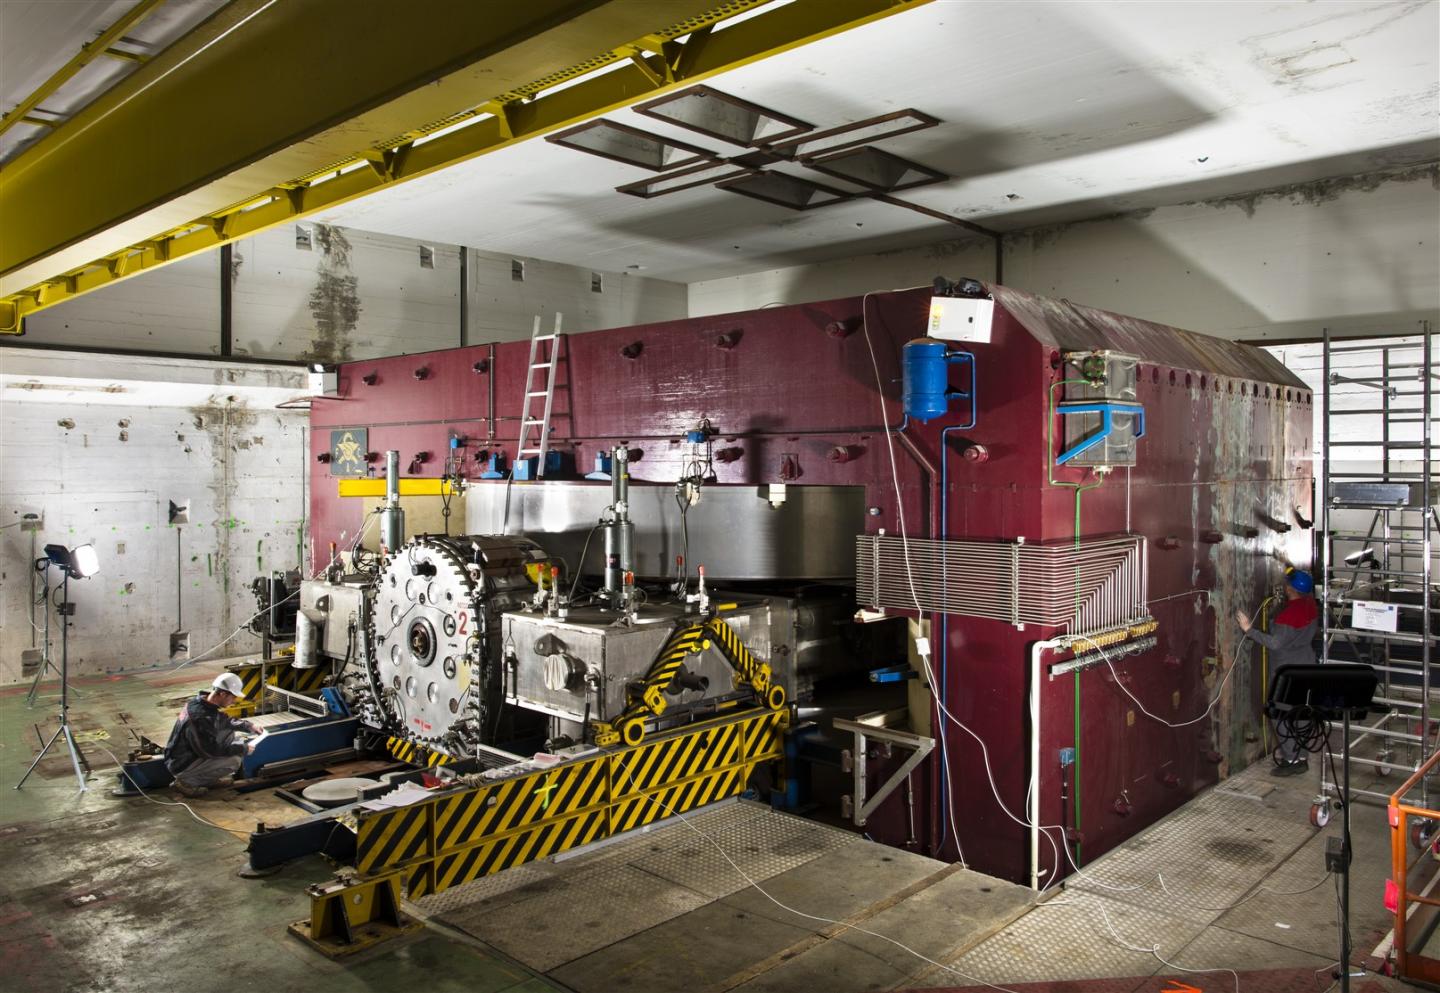 The Synchrocyclotron prepares for visitors